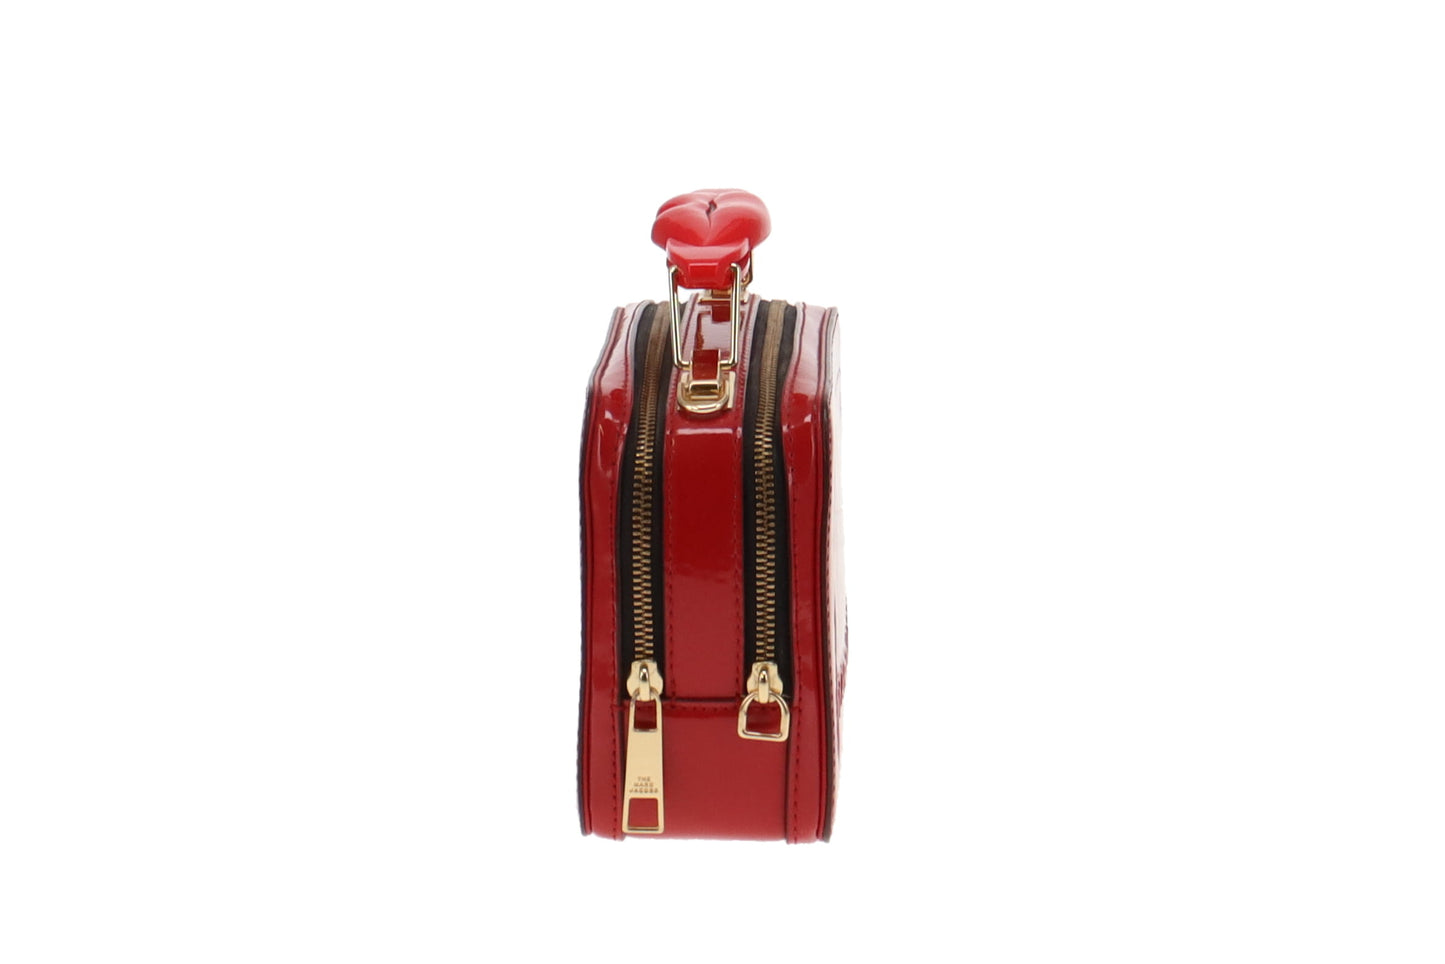 Marc Jacobs Red Patent The Box 20 Bag with Lips Handle